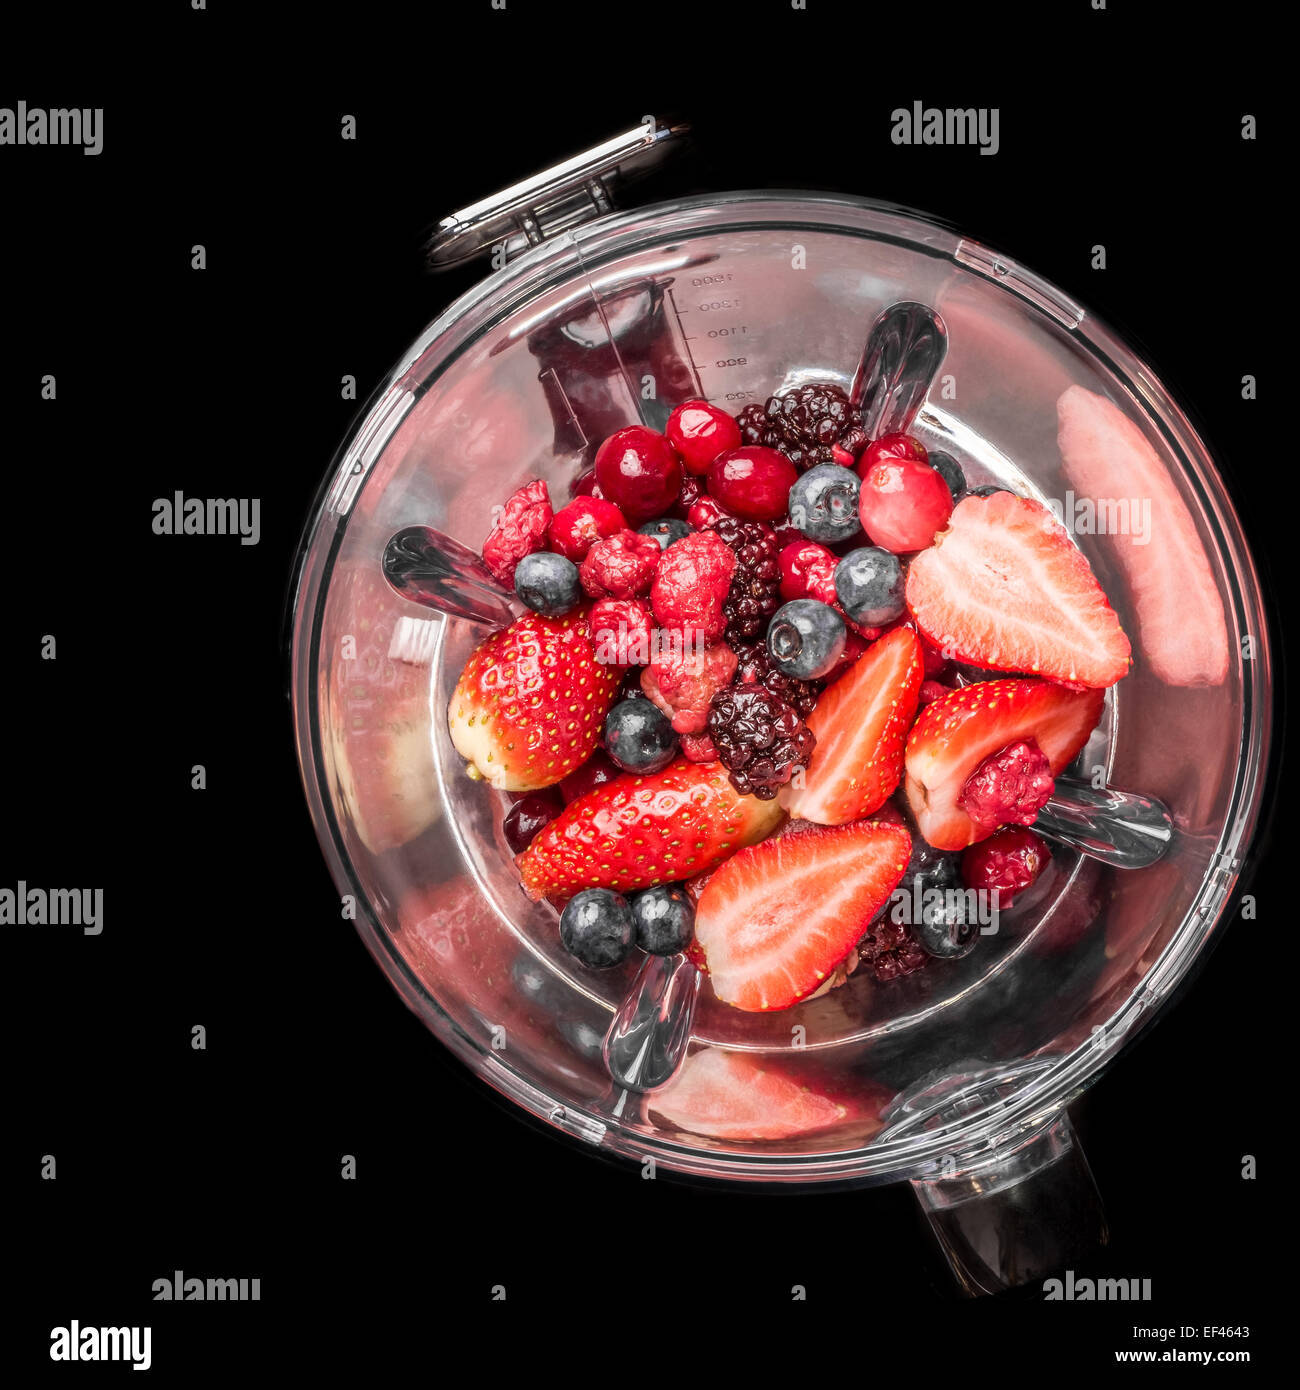 Mixed berries in a blender viewed from the top. Stock Photo